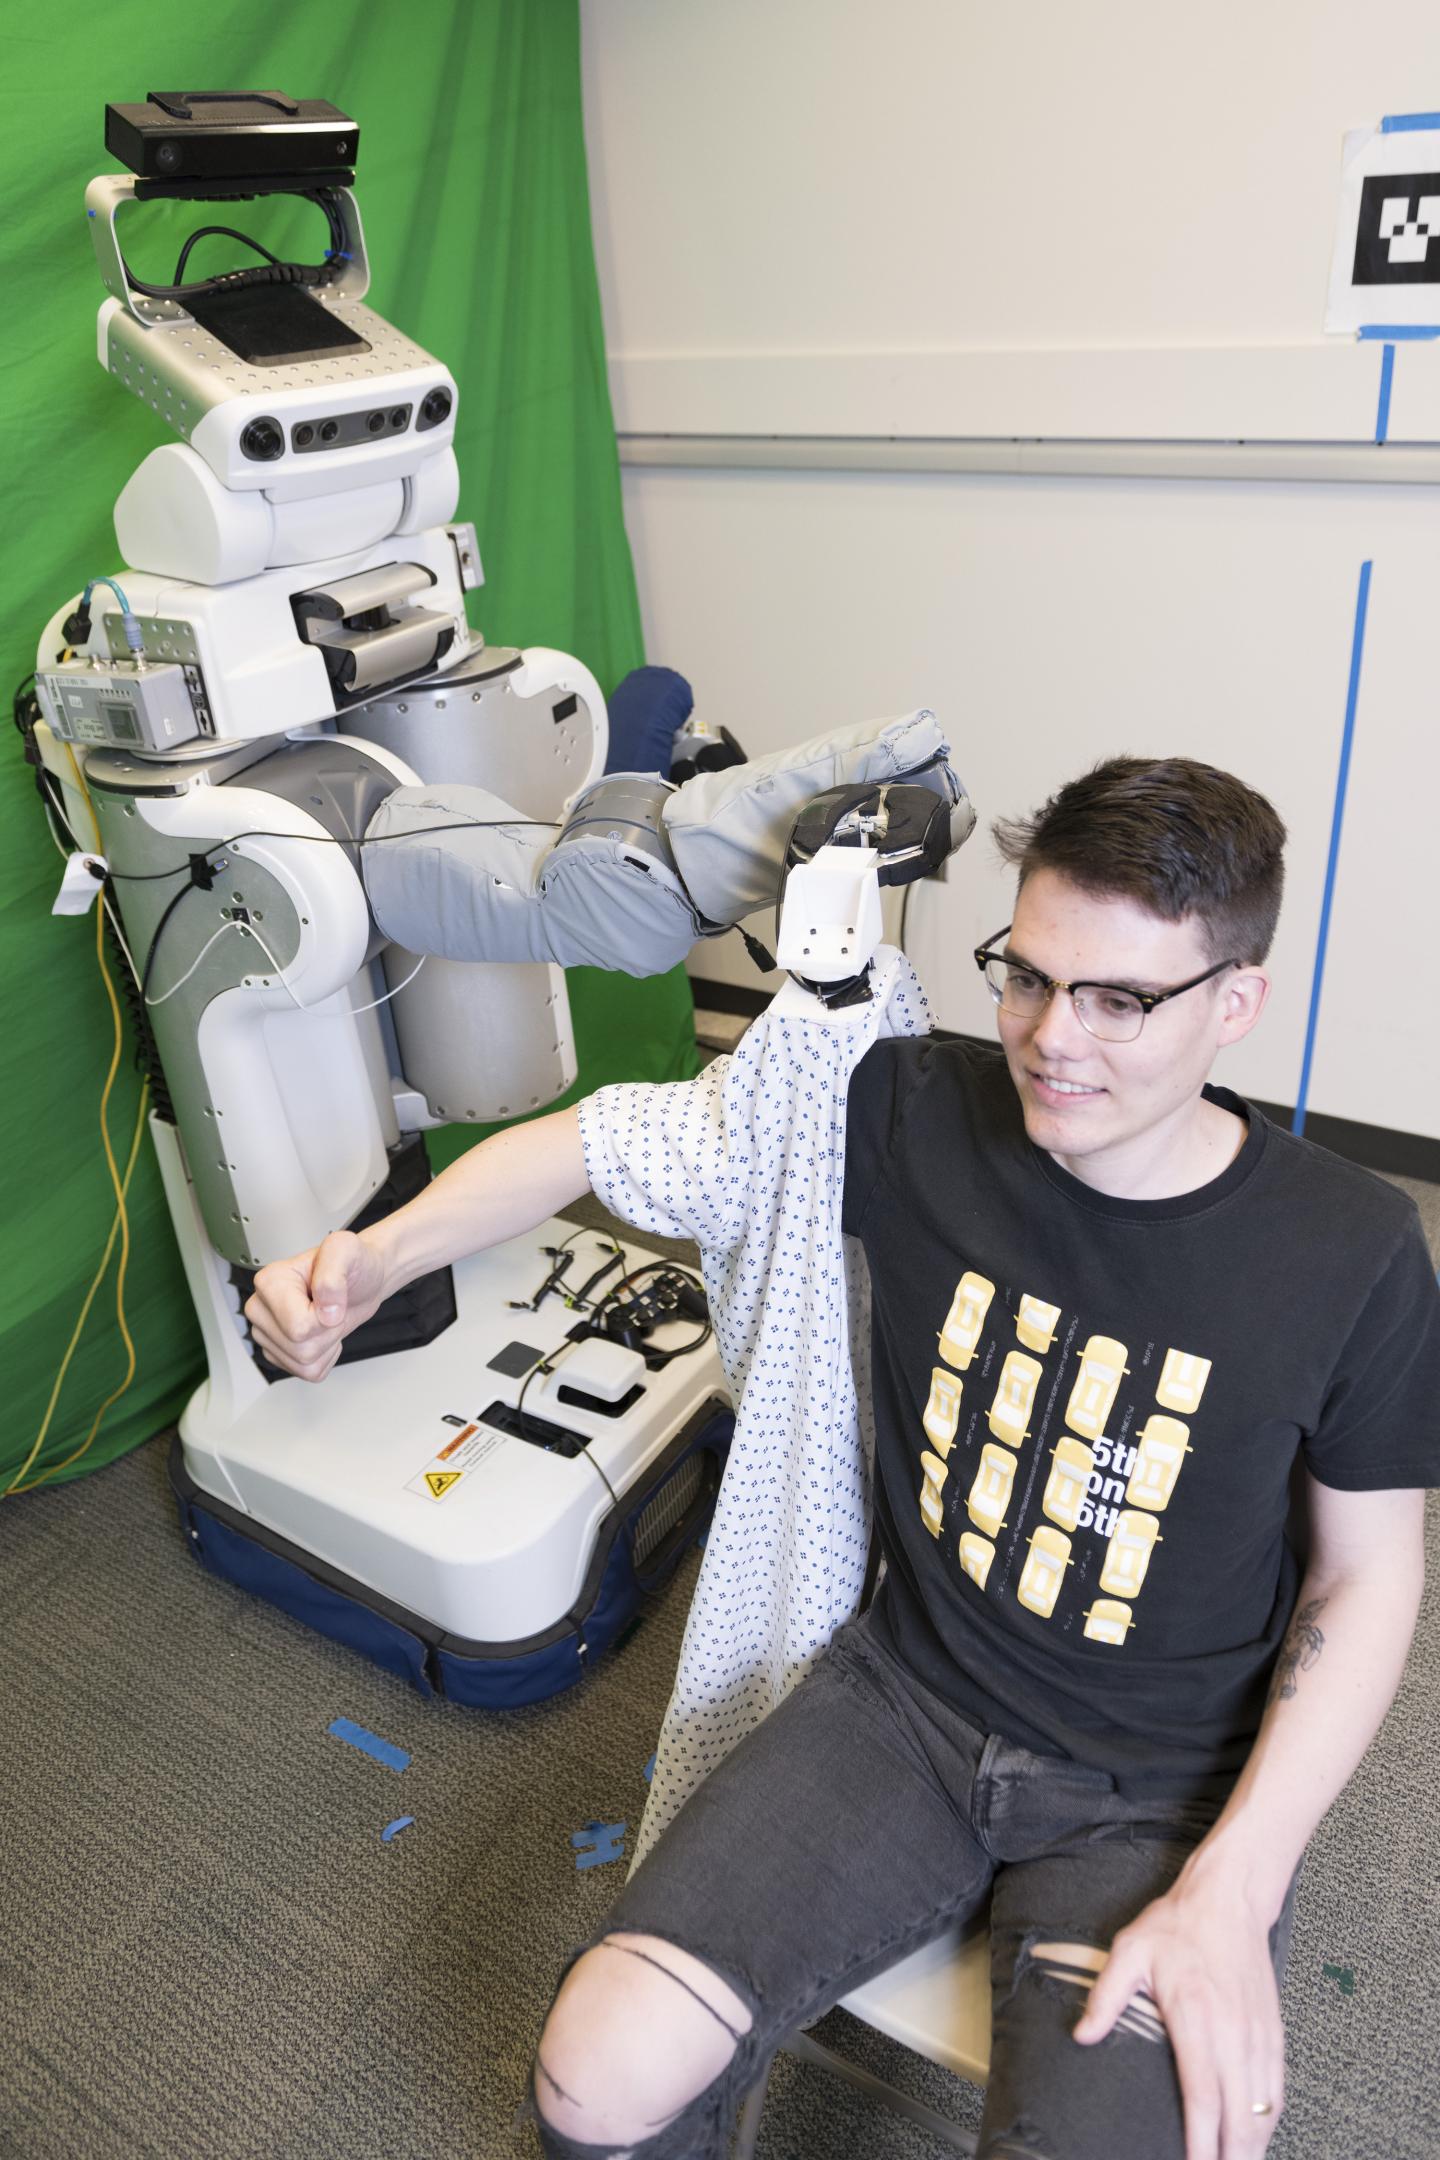 A PR2 robot puts a gown on Henry Clever, a member of the research team. Source: Georgia Tech